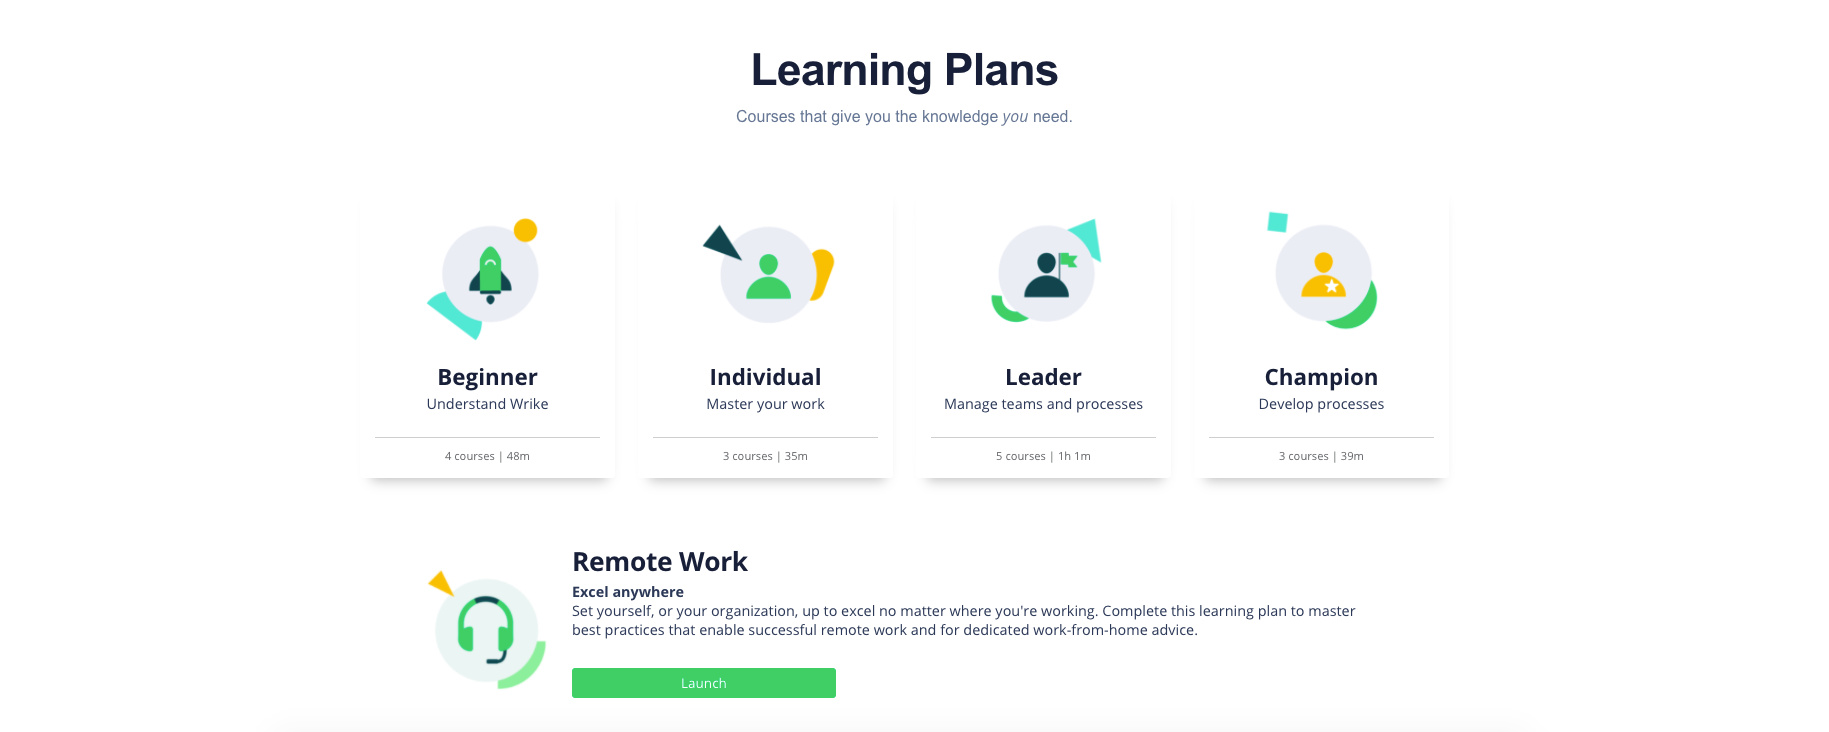 A screenshot of Wrike's Learning Plans in their website